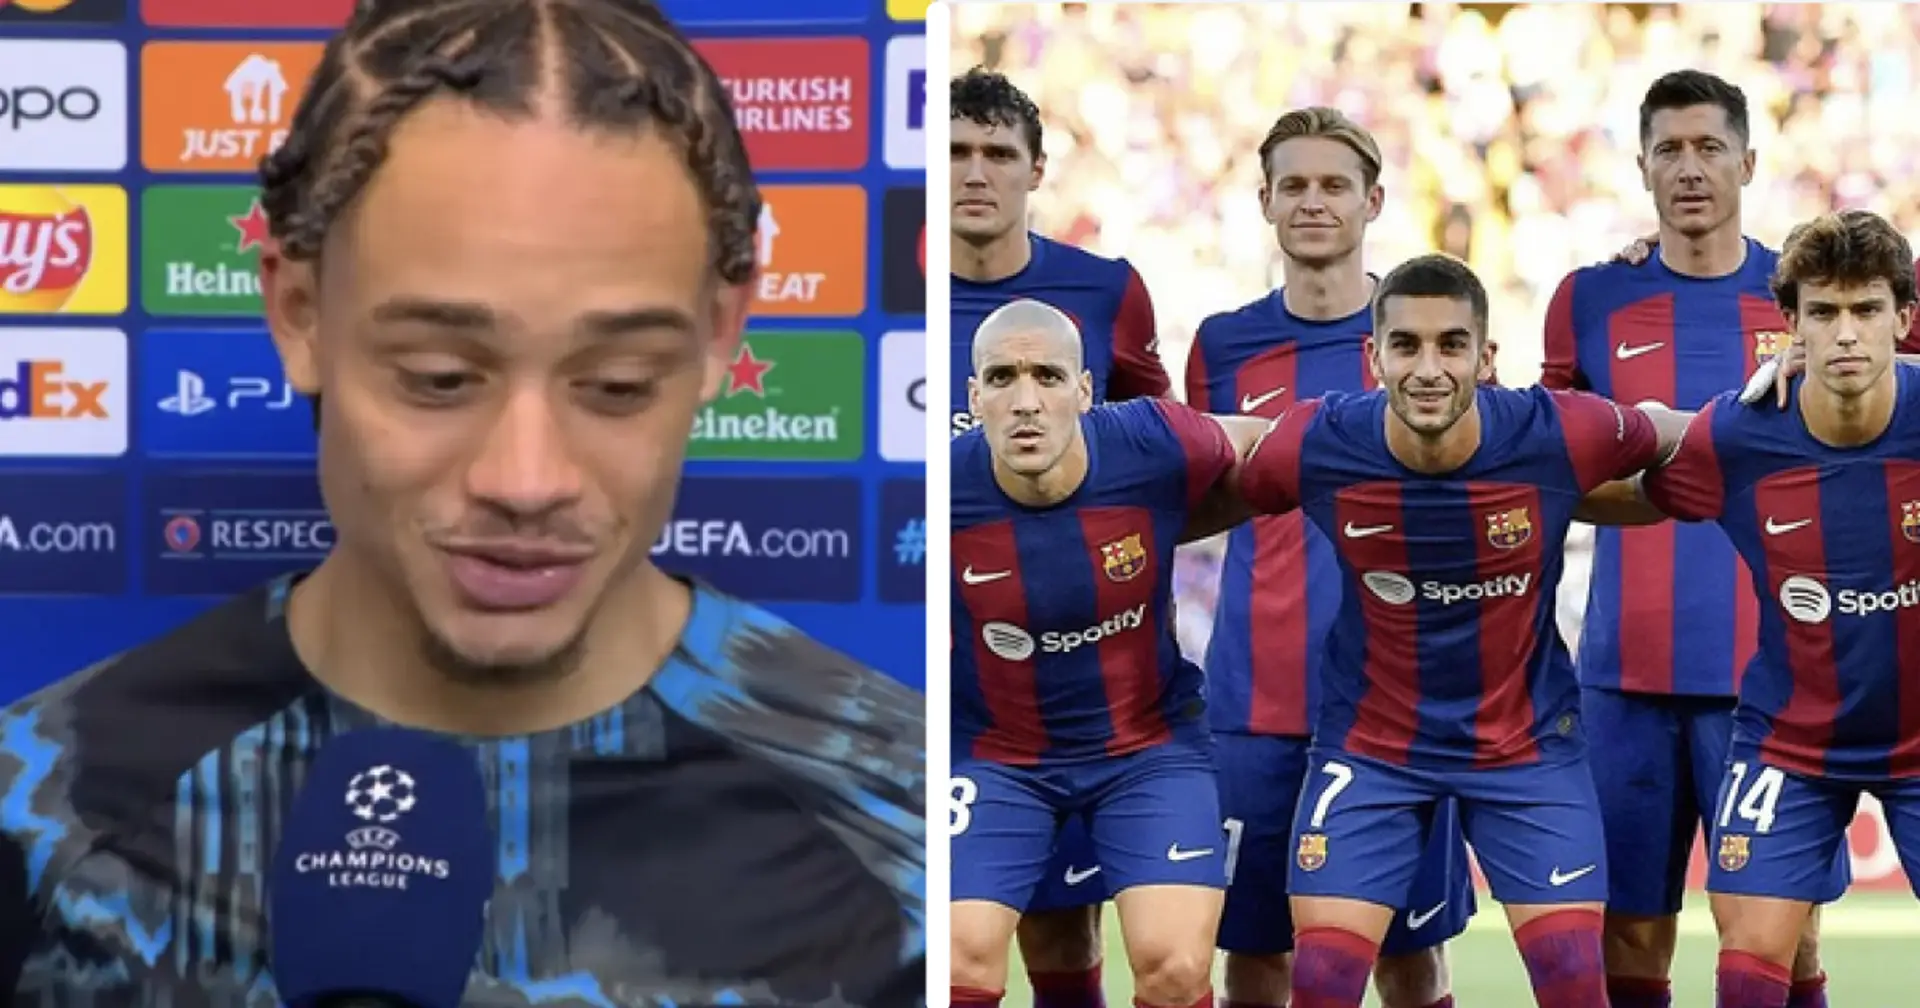 'Dream scenario': Barca fans fed up with one player v Almeria, want him replaced with Xavi Simons ASAP